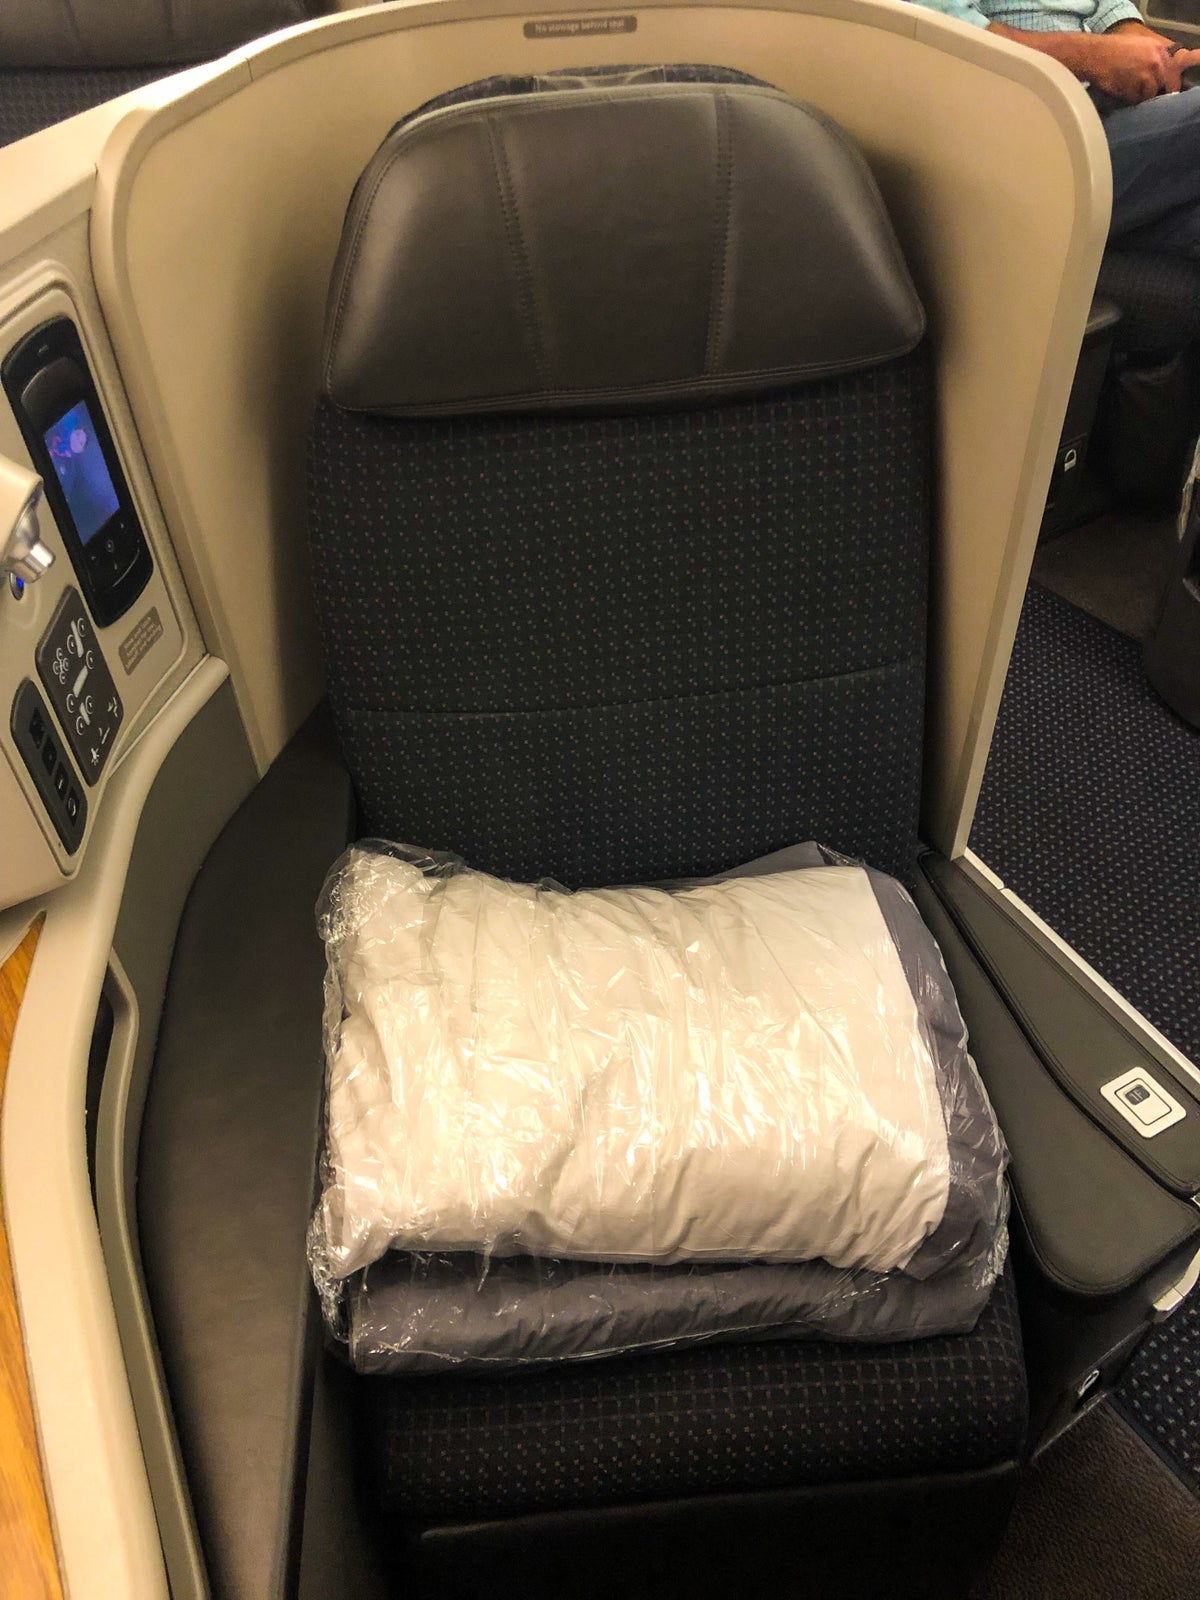 American Airlines Flagship First Class A321T seat